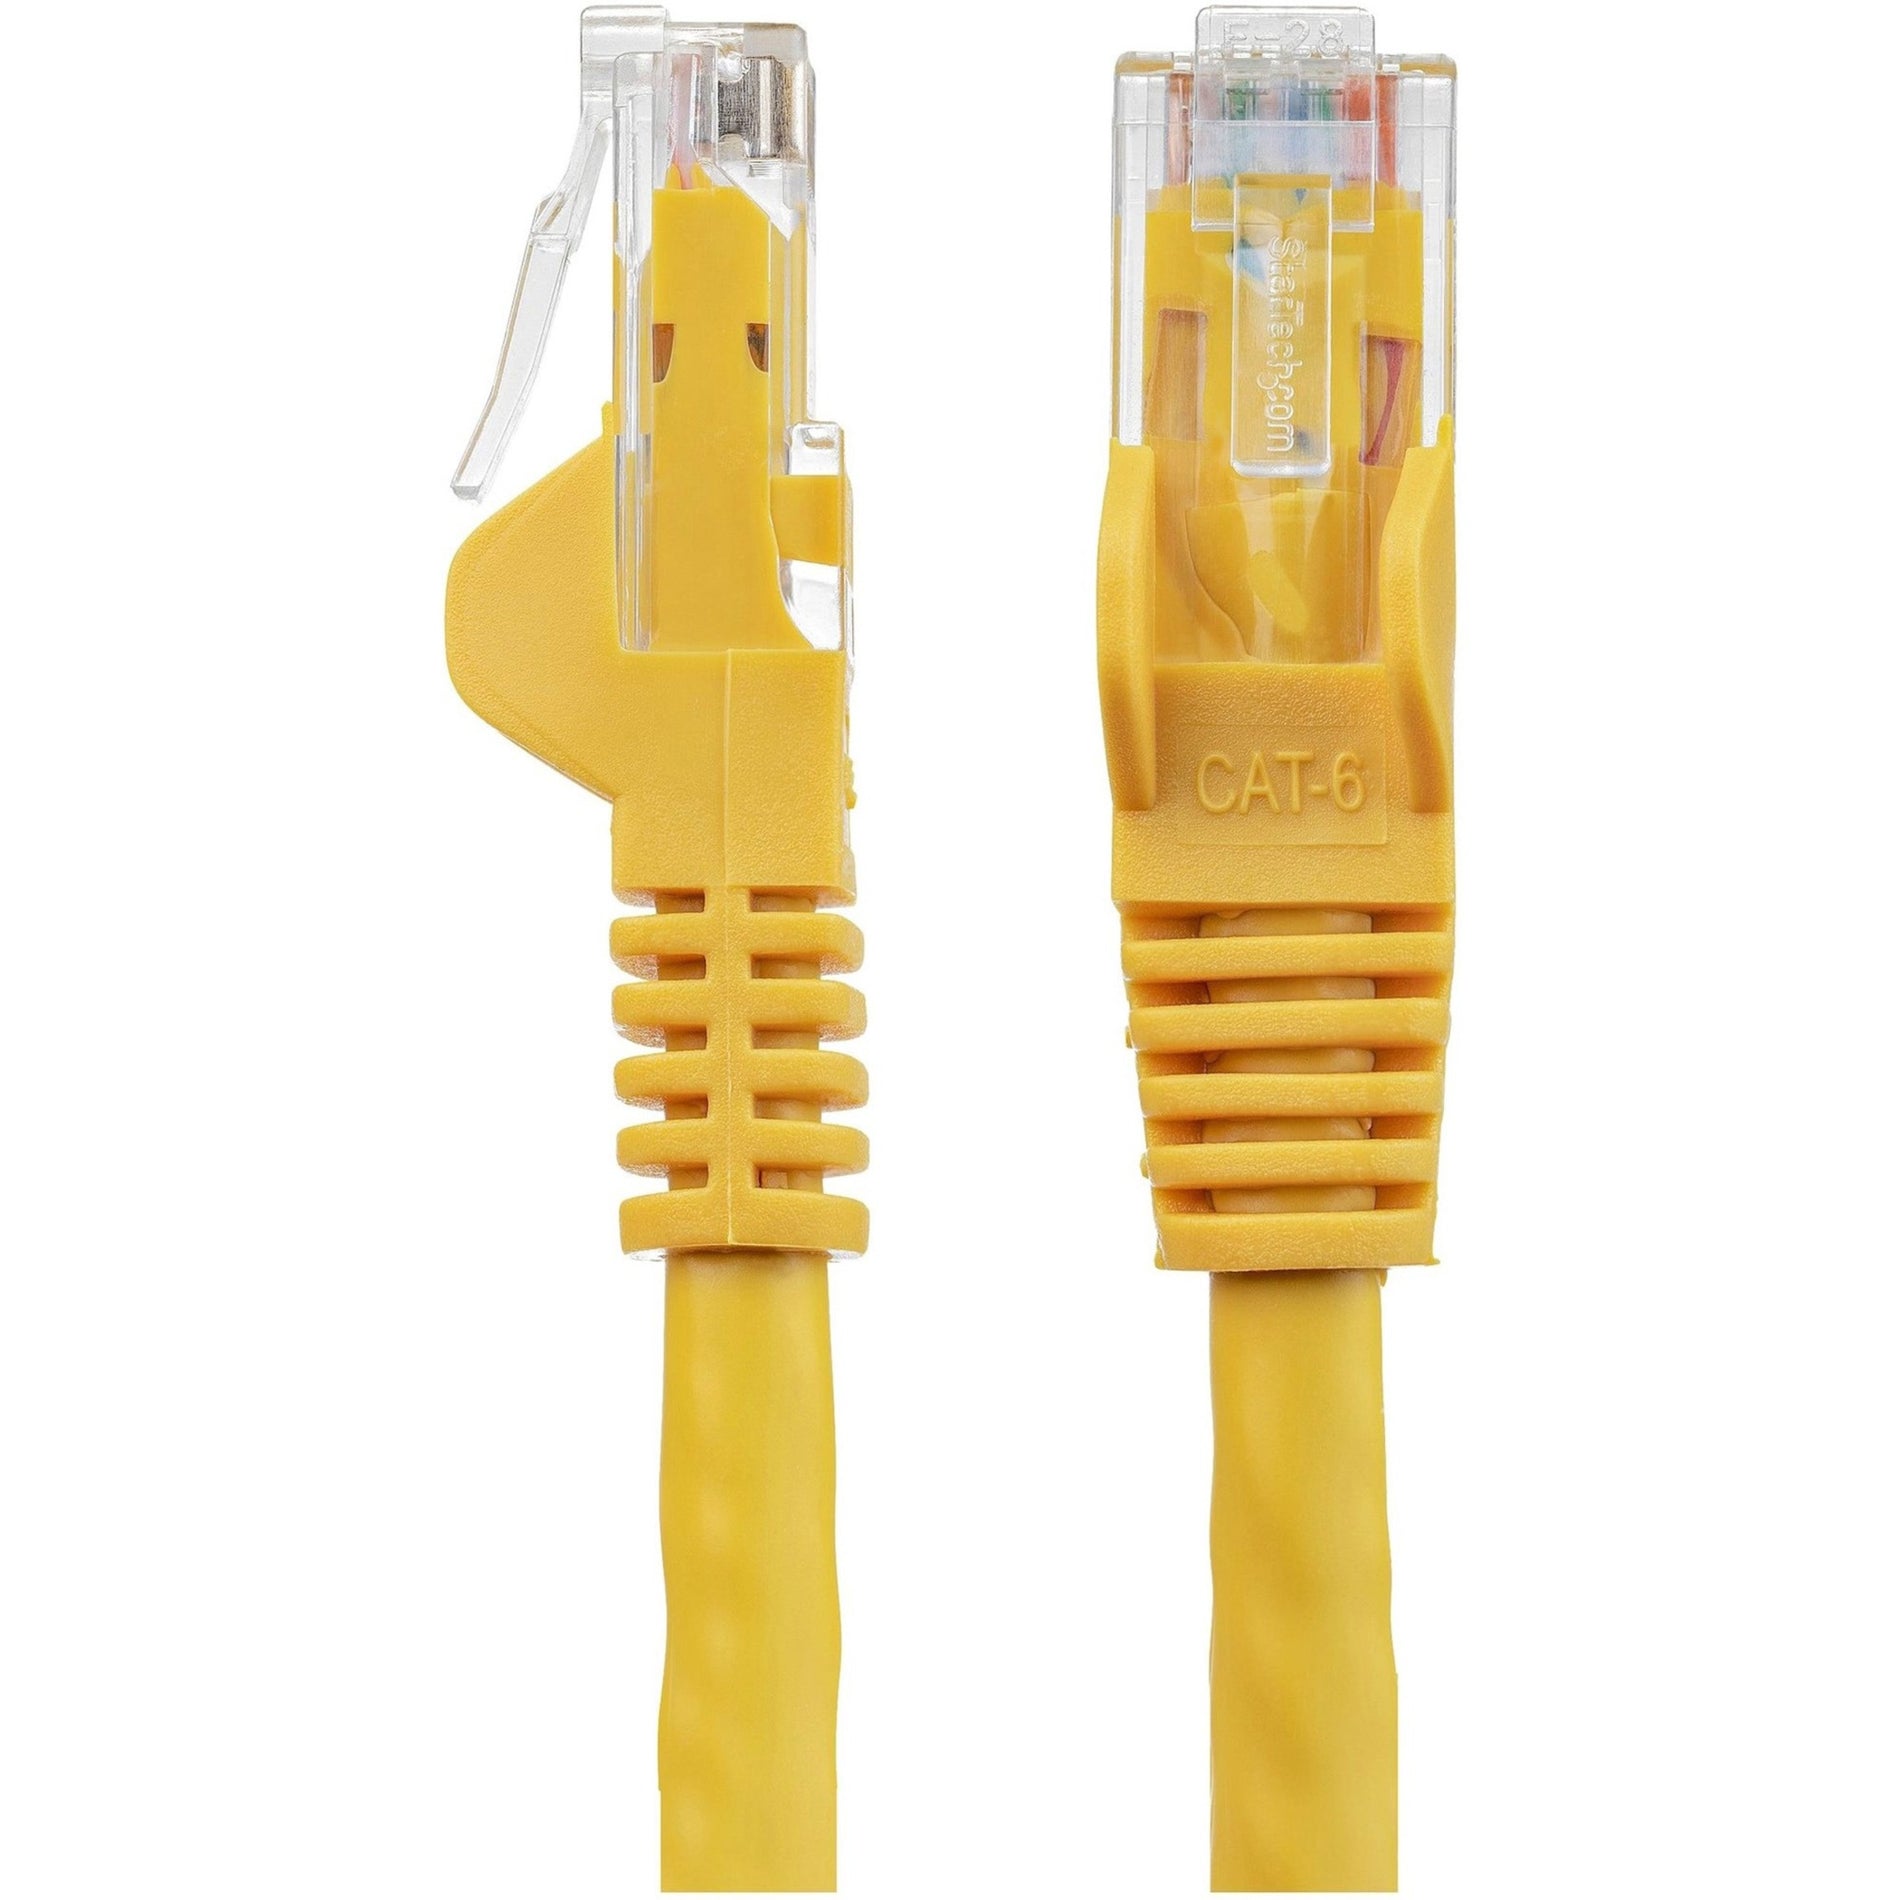 StarTech.com N6PATCH4YL Cat6 Patch Cable, 4ft Yellow Ethernet Cable, Snagless RJ45 Connectors